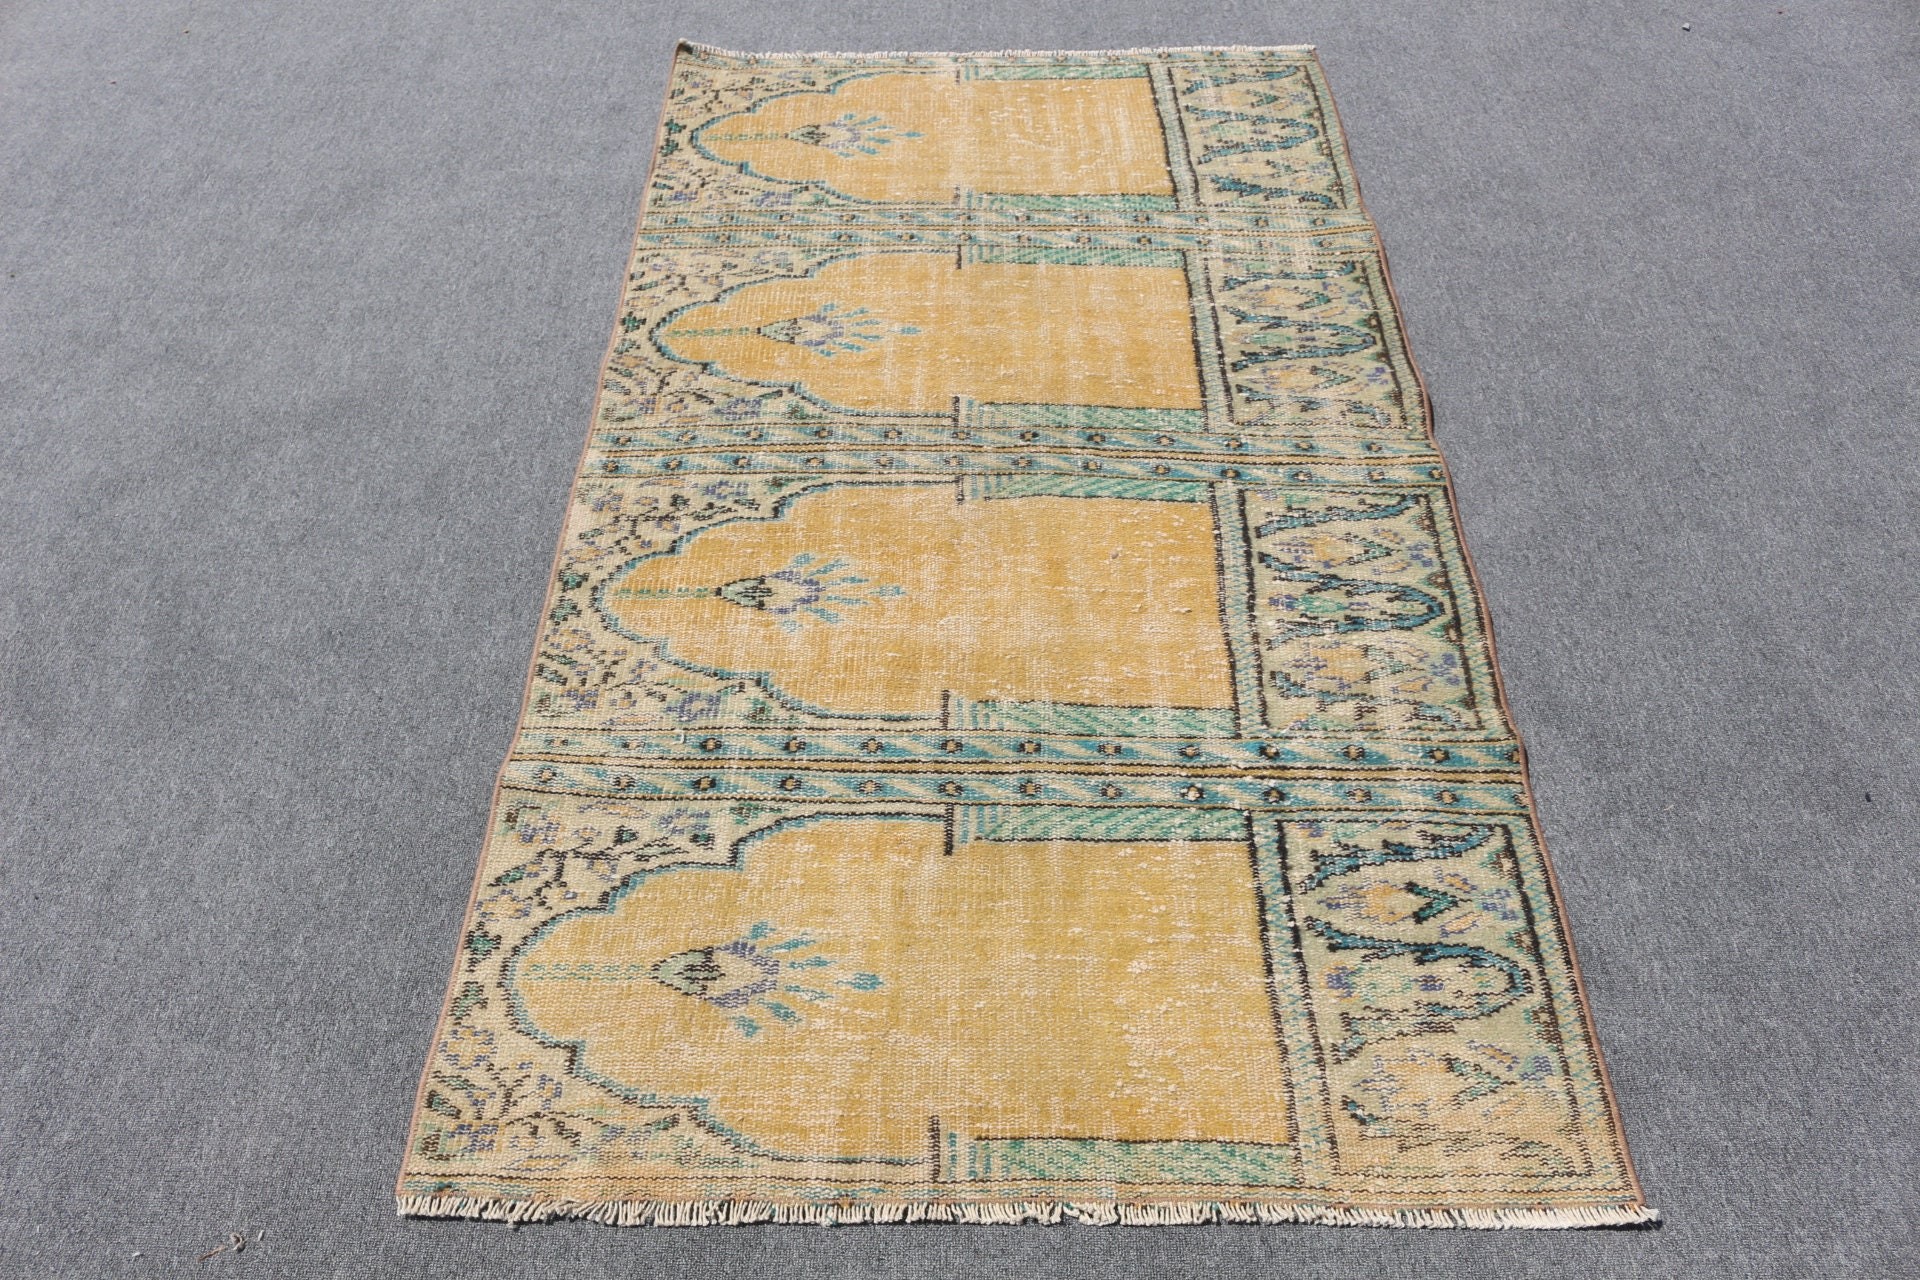 Home Decor Rugs, Turkish Rug, 3.5x6.2 ft Accent Rug, Entry Rug, Nomadic Rug, Yellow Cool Rug, Vintage Rug, Moroccan Rugs, Kitchen Rugs